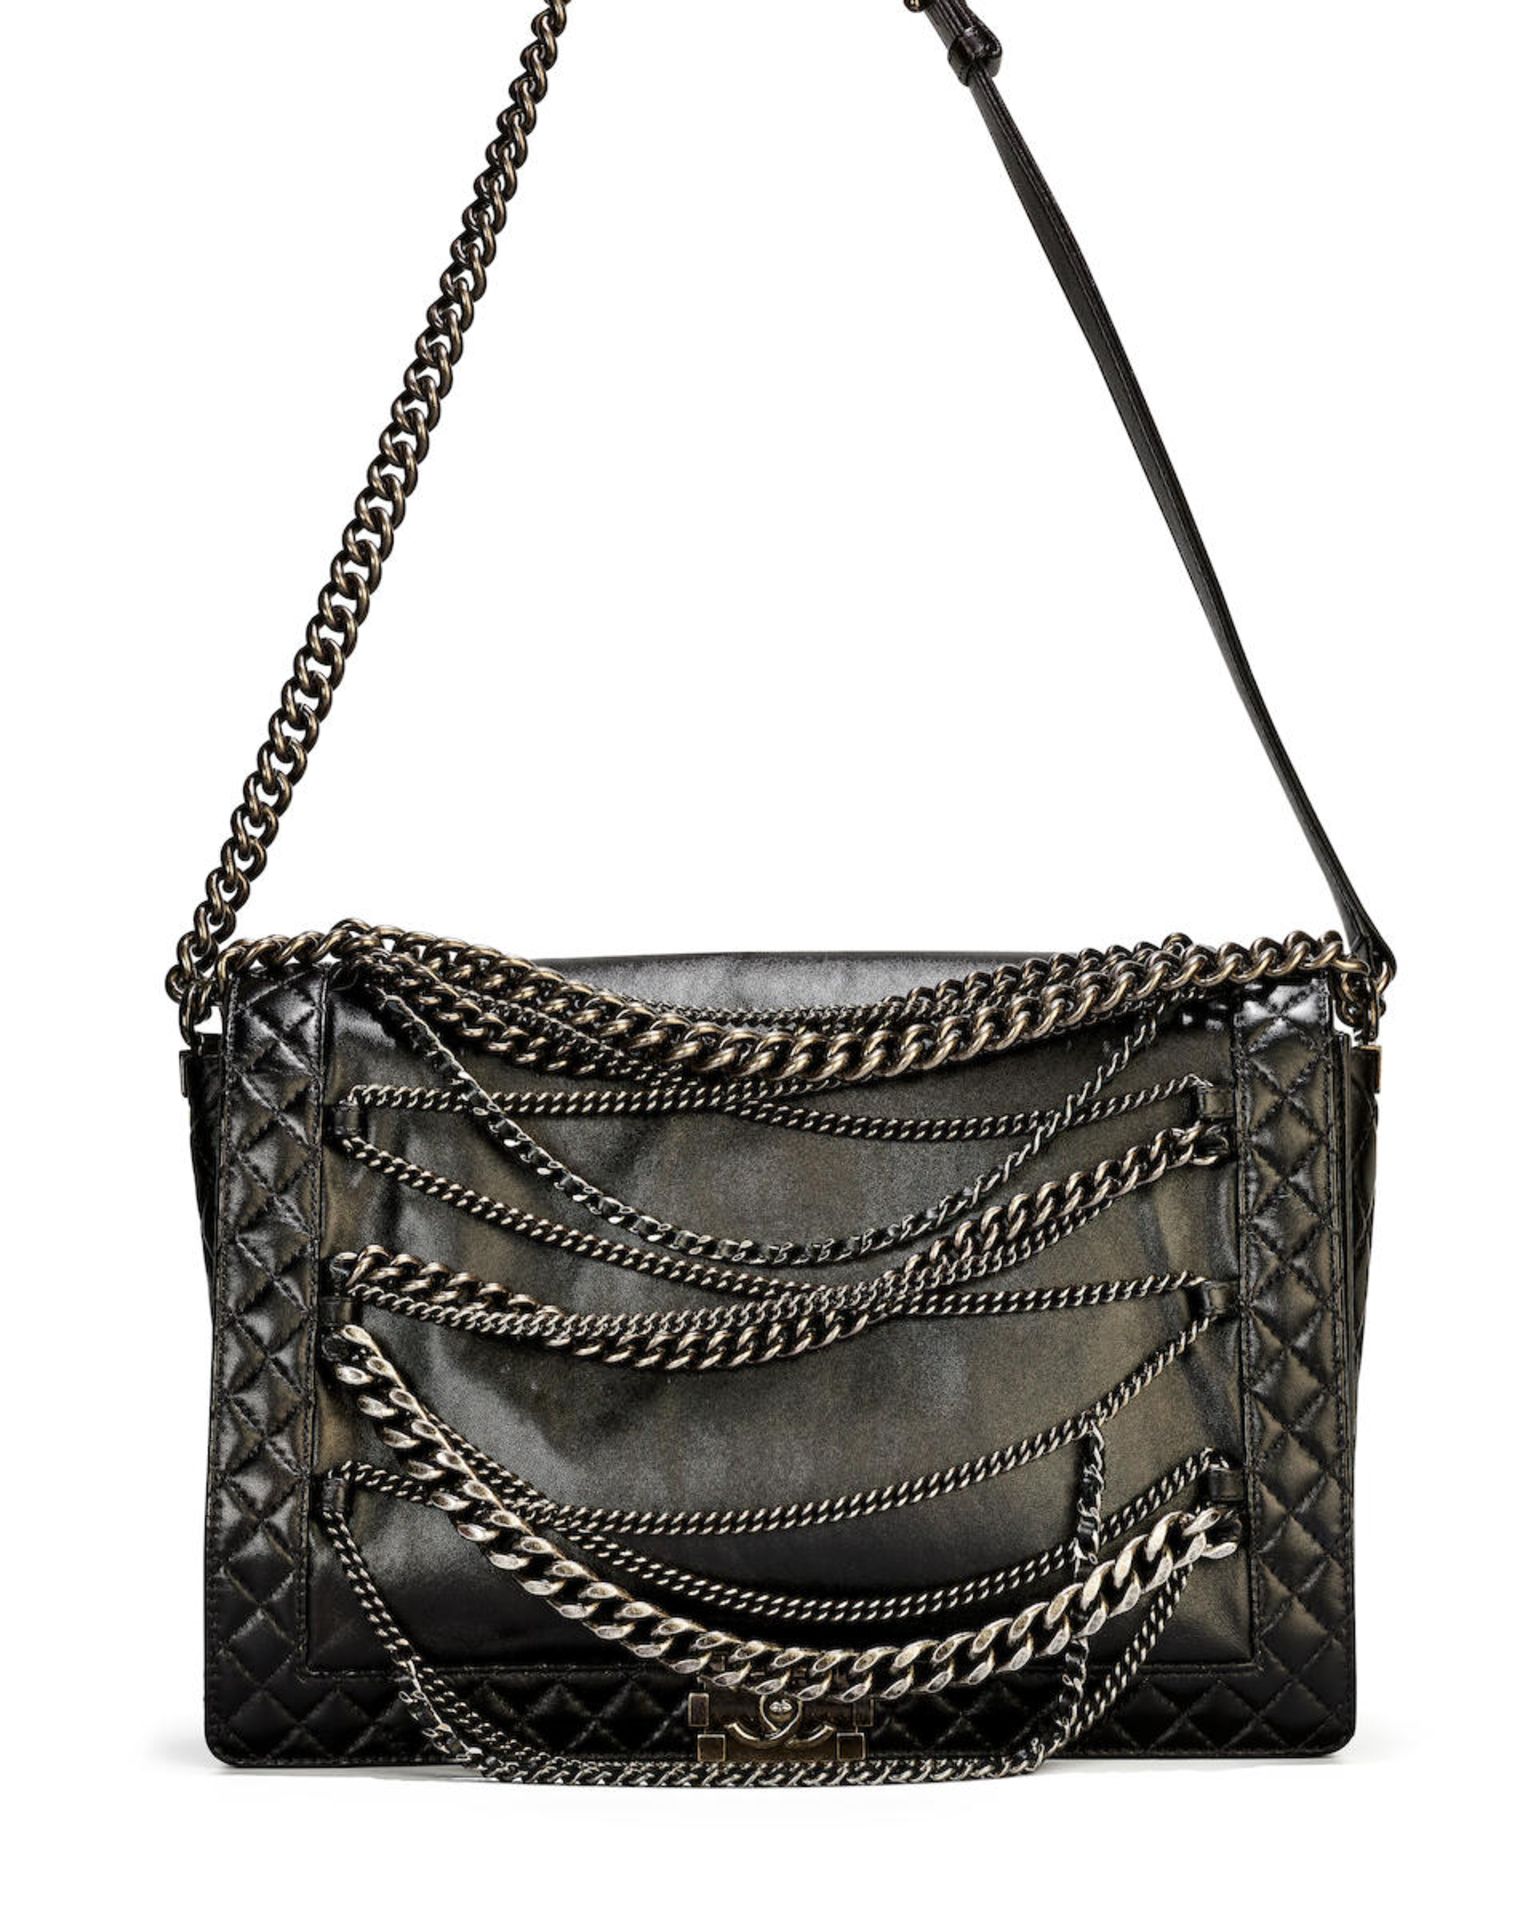 CHANEL: BLACK CALFSKIN EXTRA LARGE ENCHAINED BOY BAG WITH RUTHÉNIUM HARDWARE